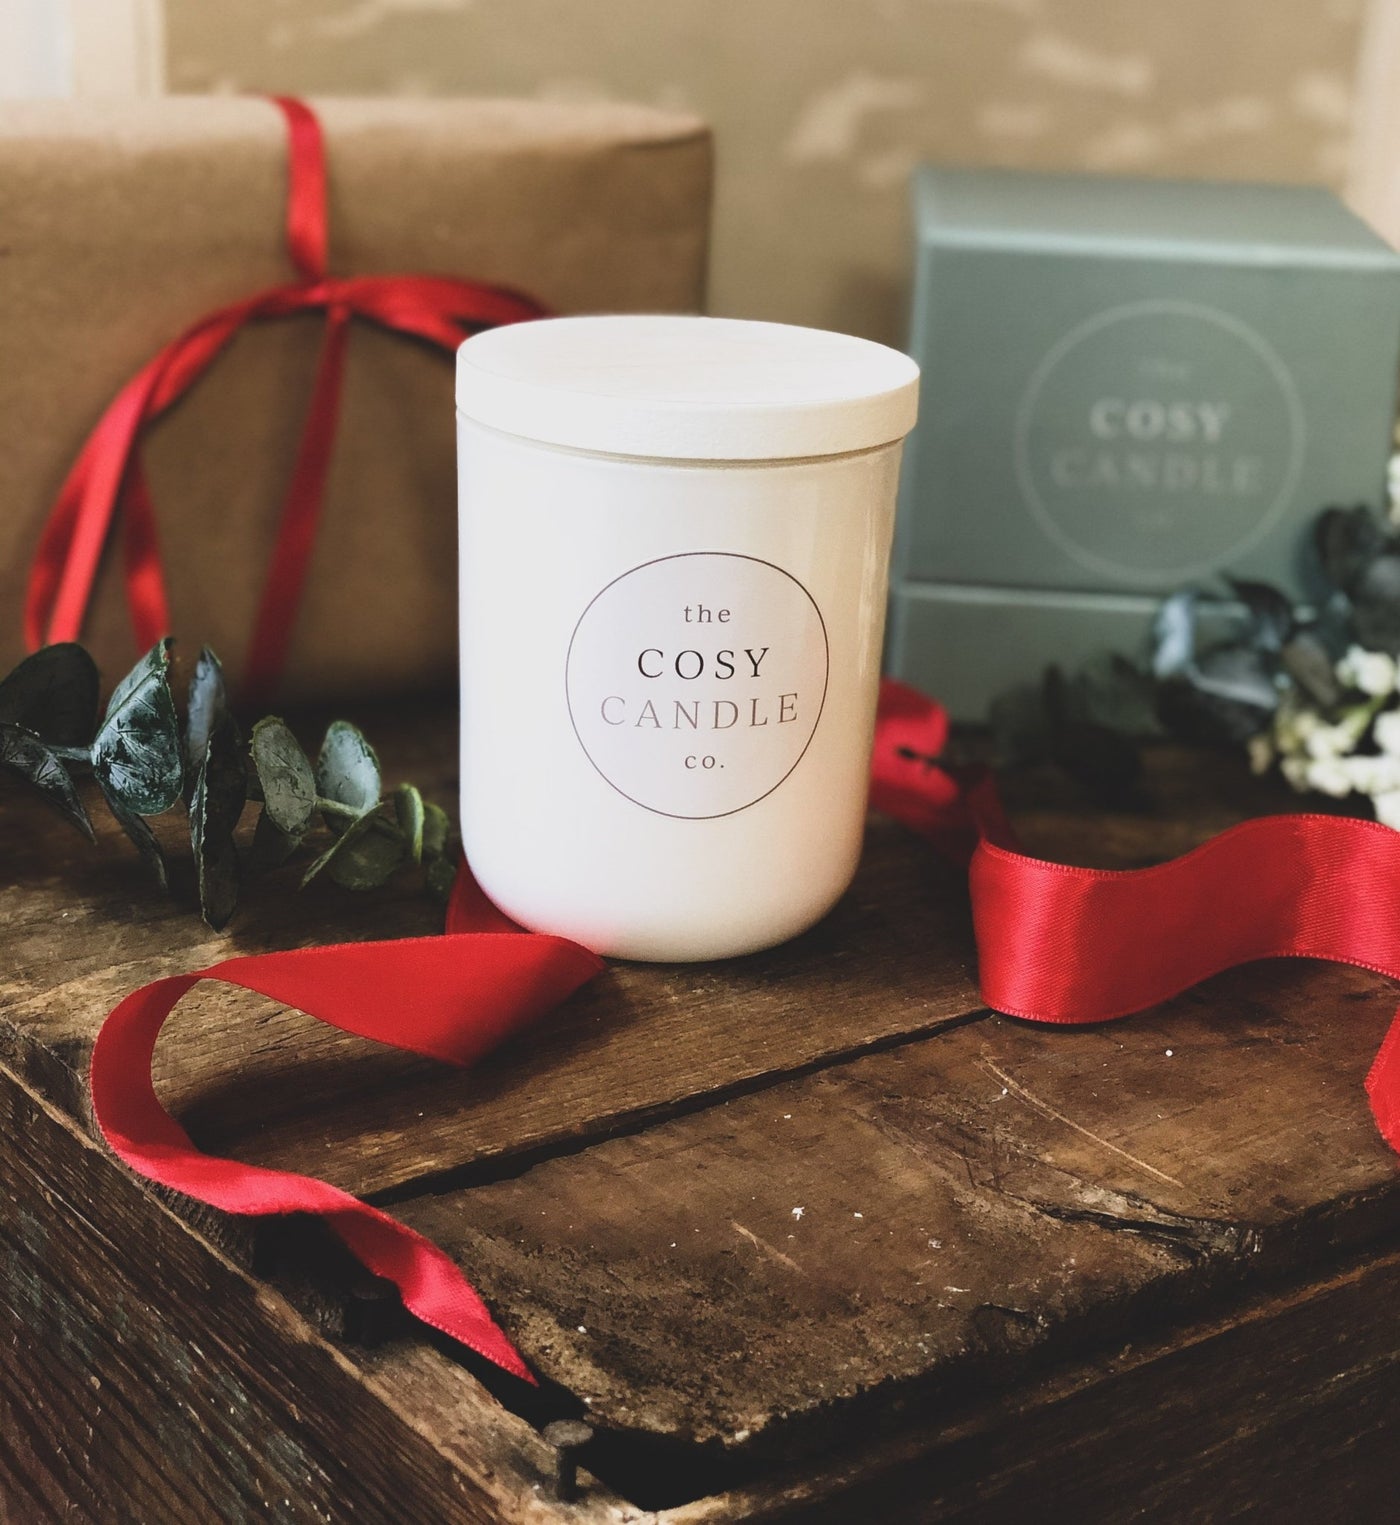 Christmas candle gifts & soy wax melts | The Cosy Candle Co